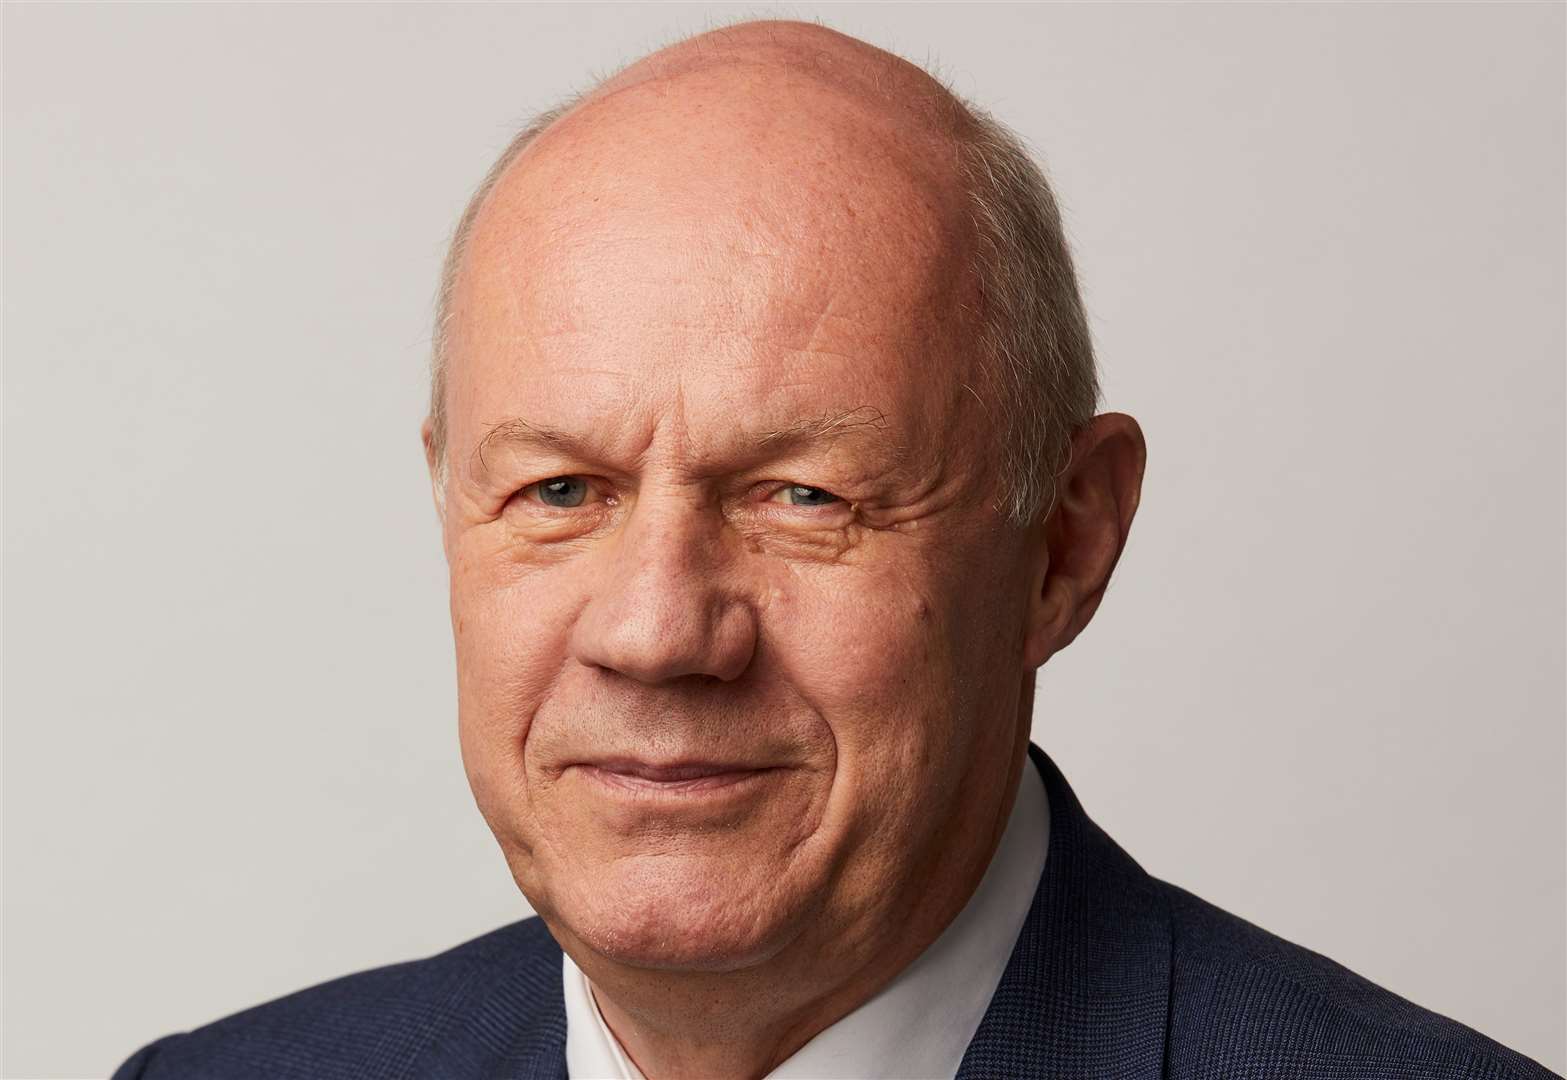 Damian Green is among the Kent MPs rebelling over housebuilding targets